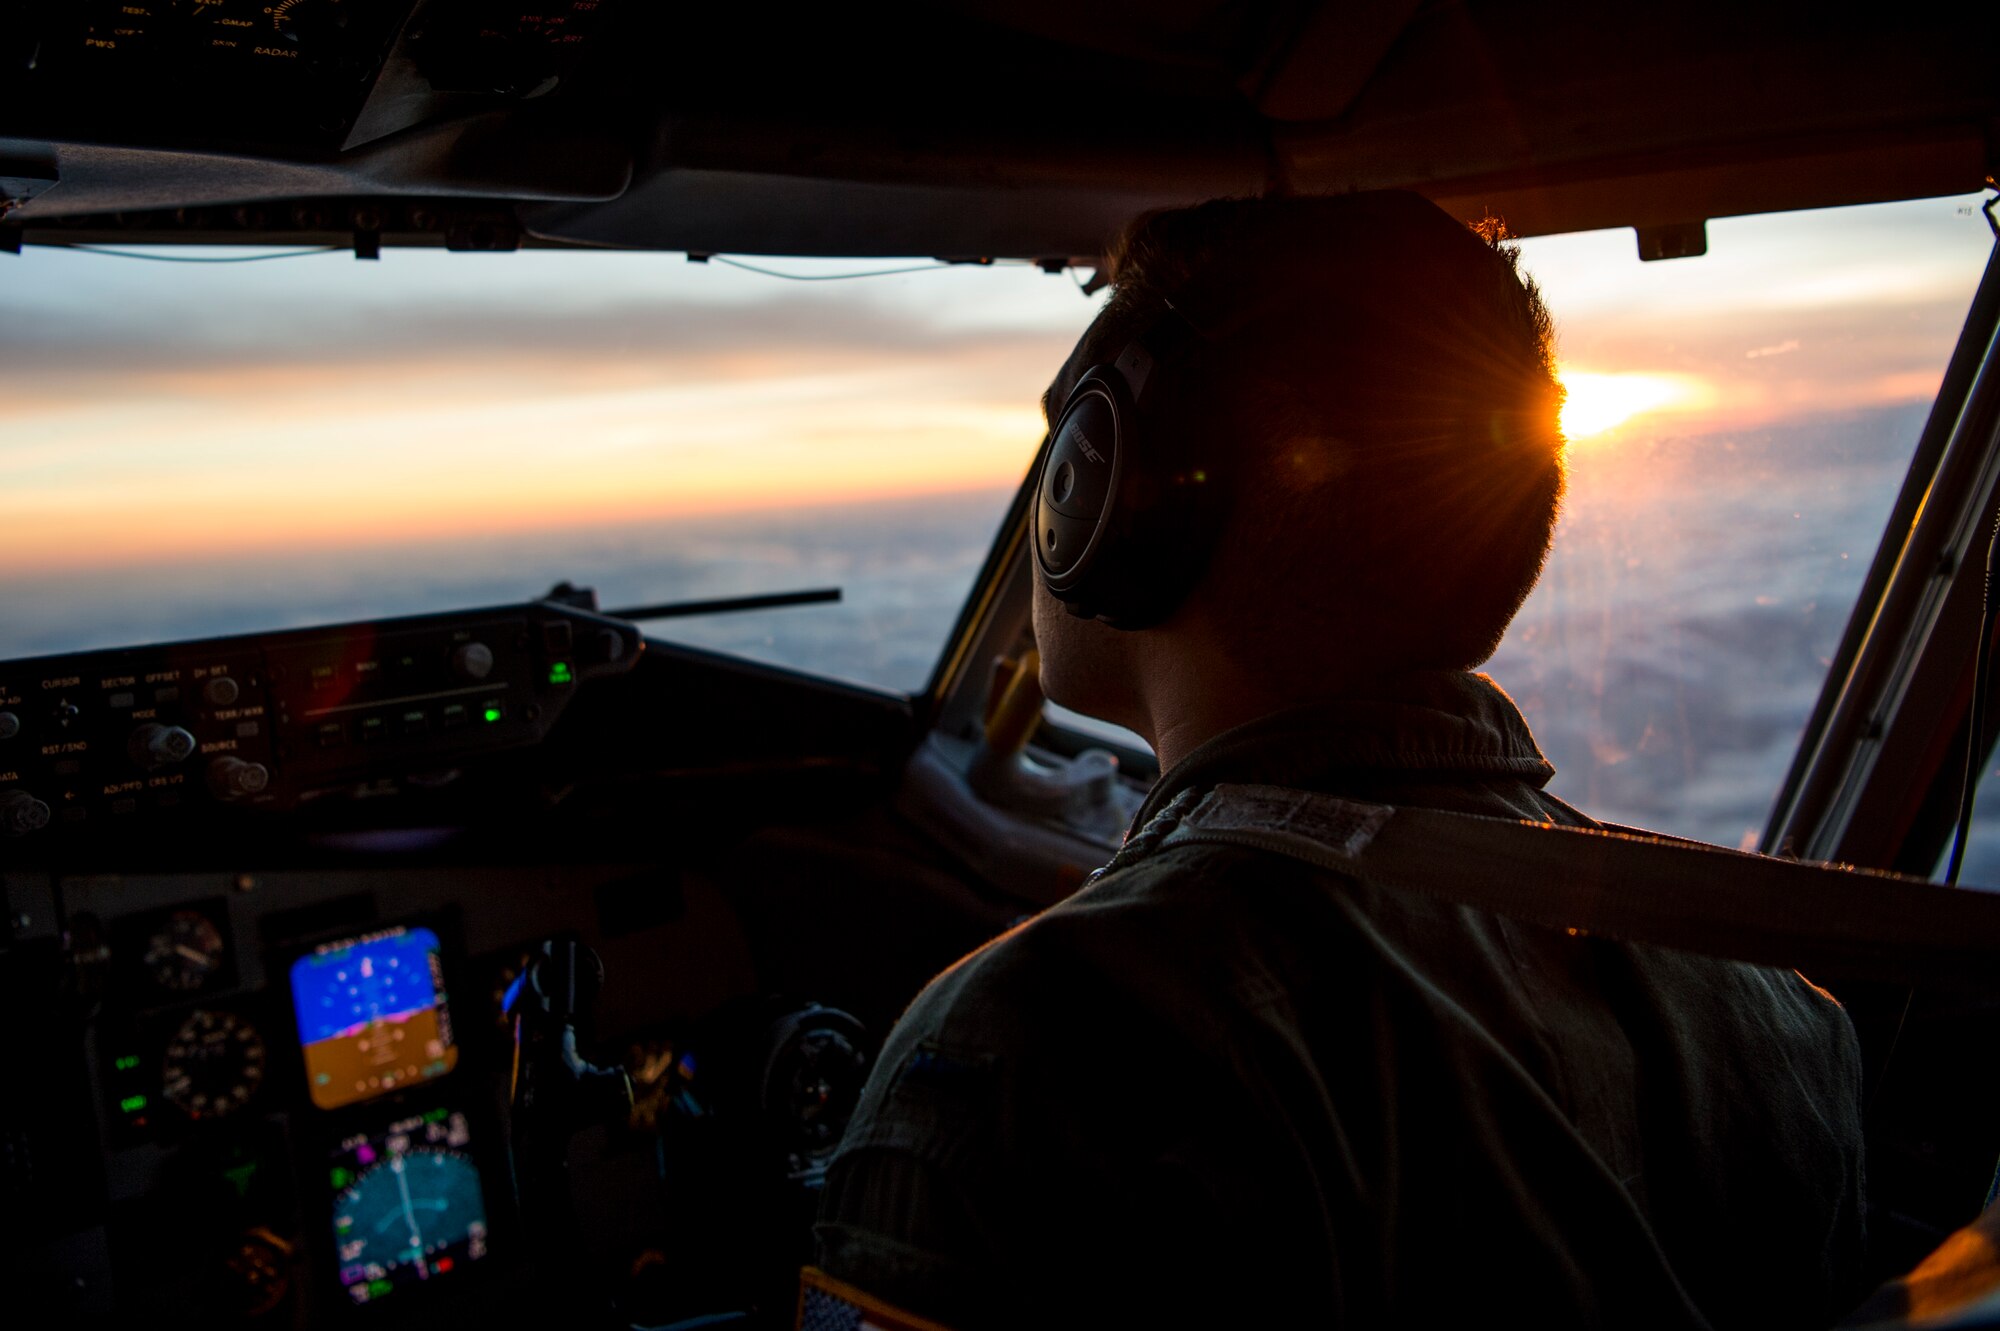 U.S. Air Force 1st Lt. Sean Thomas, a 91st Air Refueling Squadron KC-135 Stratotanker pilot, scans the evening horizon for the receiver aircraft during an aerial-refueling mission supporting Exercise Emerald Warrior, Jan. 17, 2019 over the Gulf of Mexico.